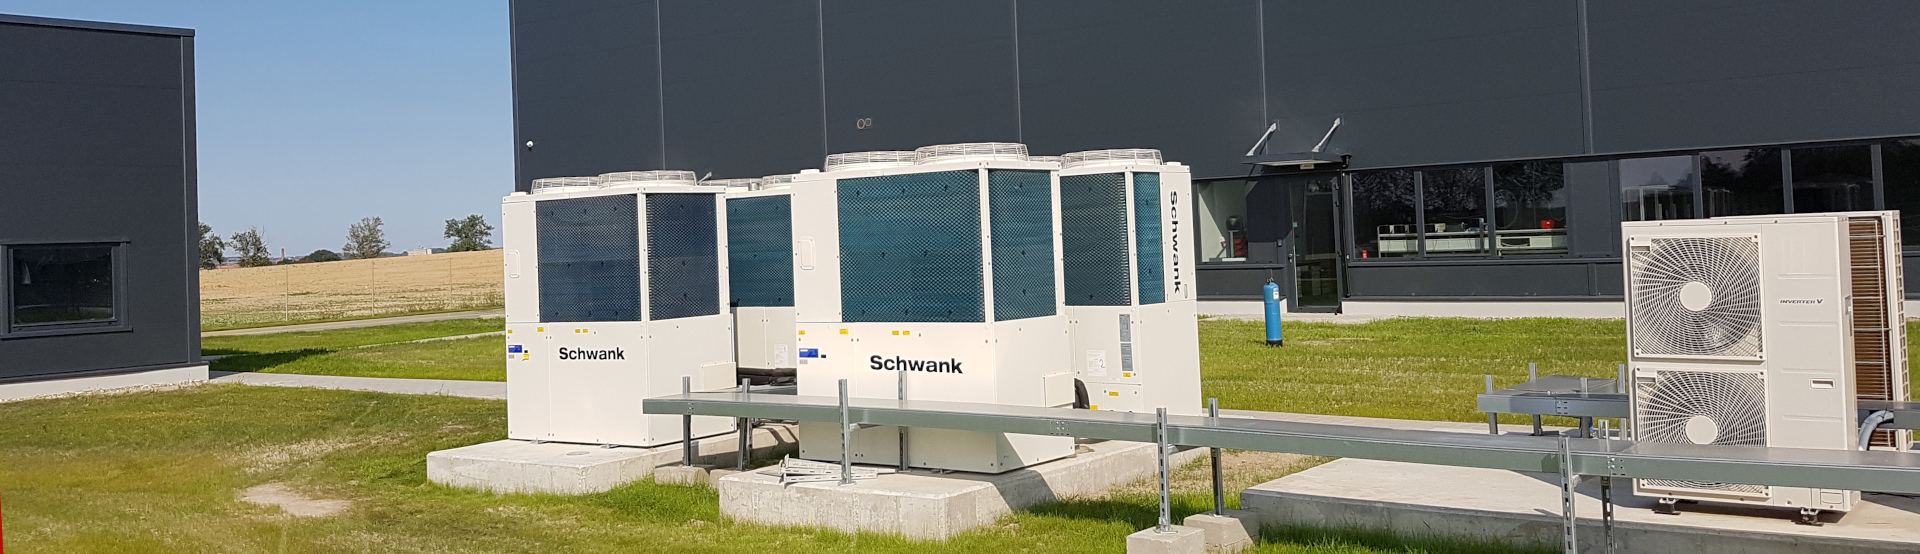 Four gas heat pumps from Schwank in front of an industrial building.